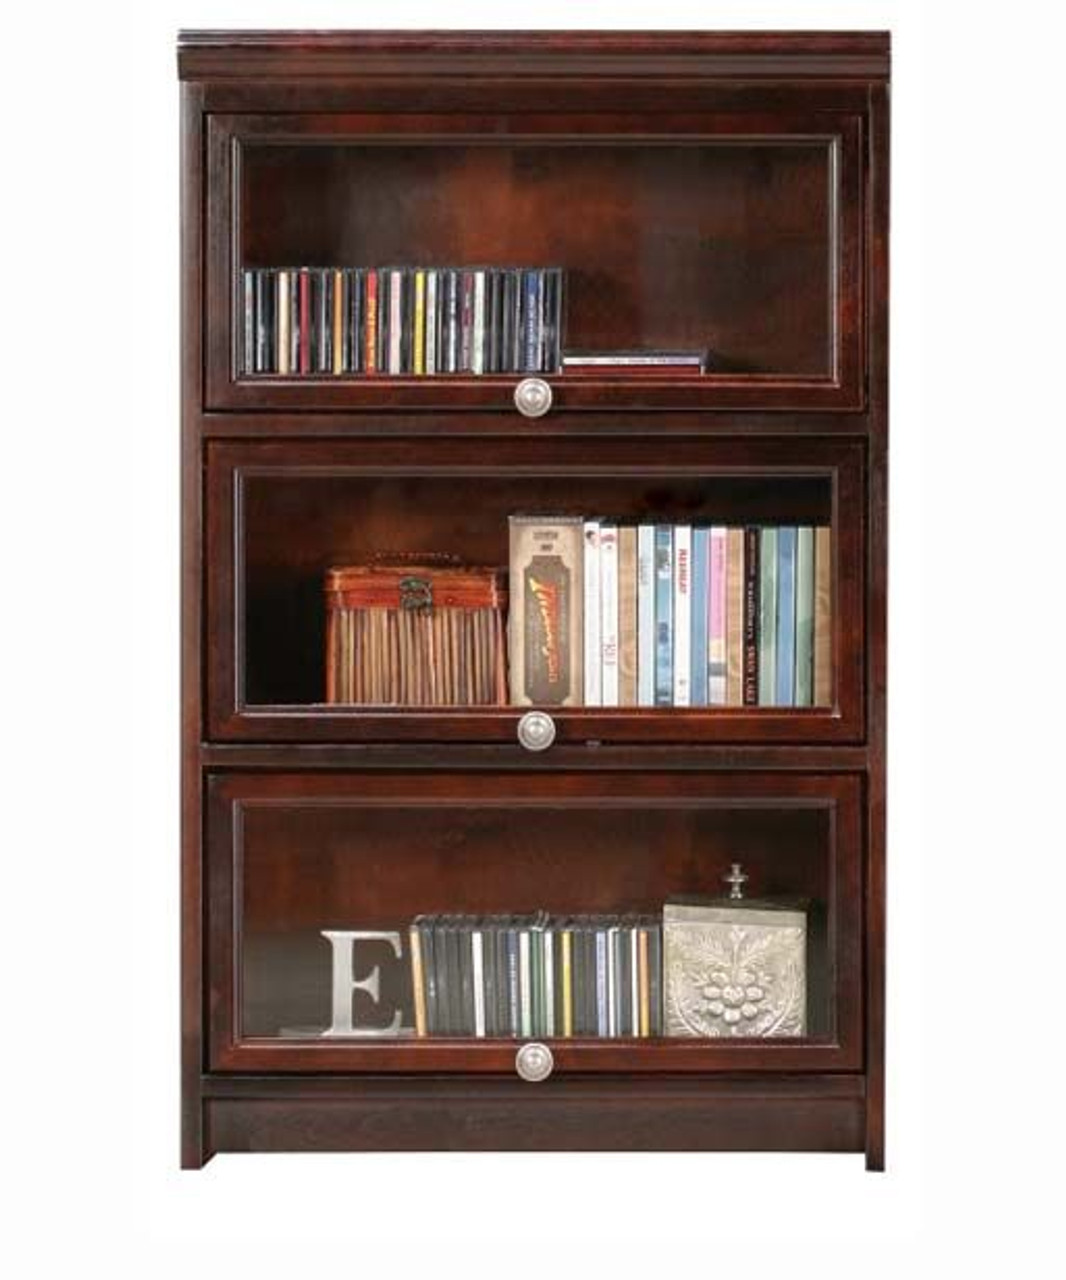 DVD Storage 3 Door Media Cabinet Glass Case 24 x 38.75" Coastal Solid Poplar and Birch Wood Painted Hardwood Home Office Furniture with 90 DVD Capacity, Shown in Caribbean Rum, Eagle Part # E-72053